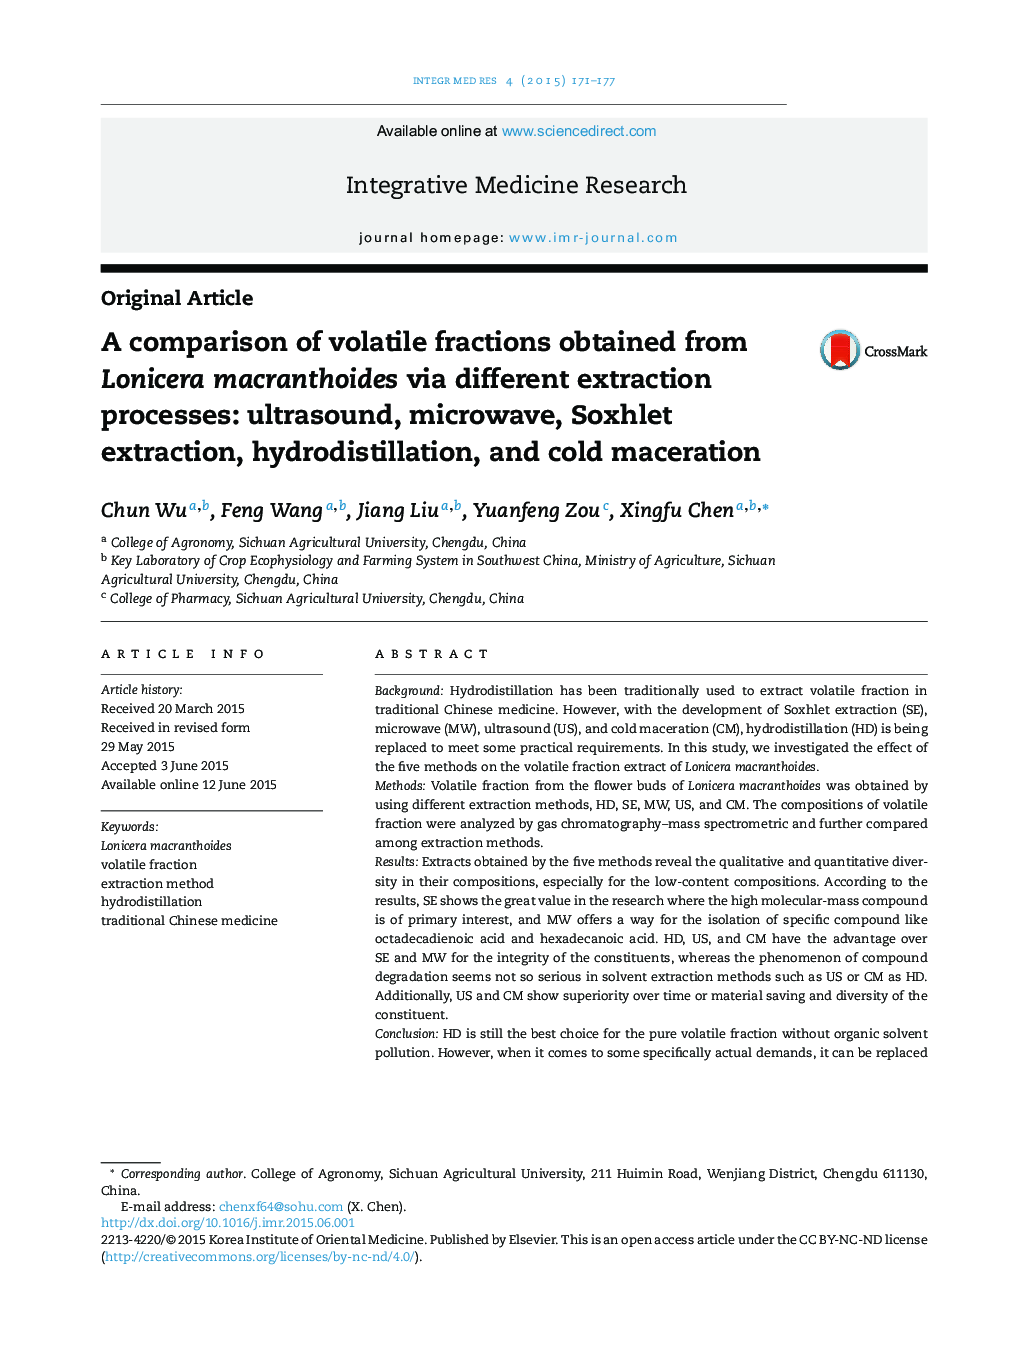 A comparison of volatile fractions obtained from Lonicera macranthoides via different extraction processes: ultrasound, microwave, Soxhlet extraction, hydrodistillation, and cold maceration